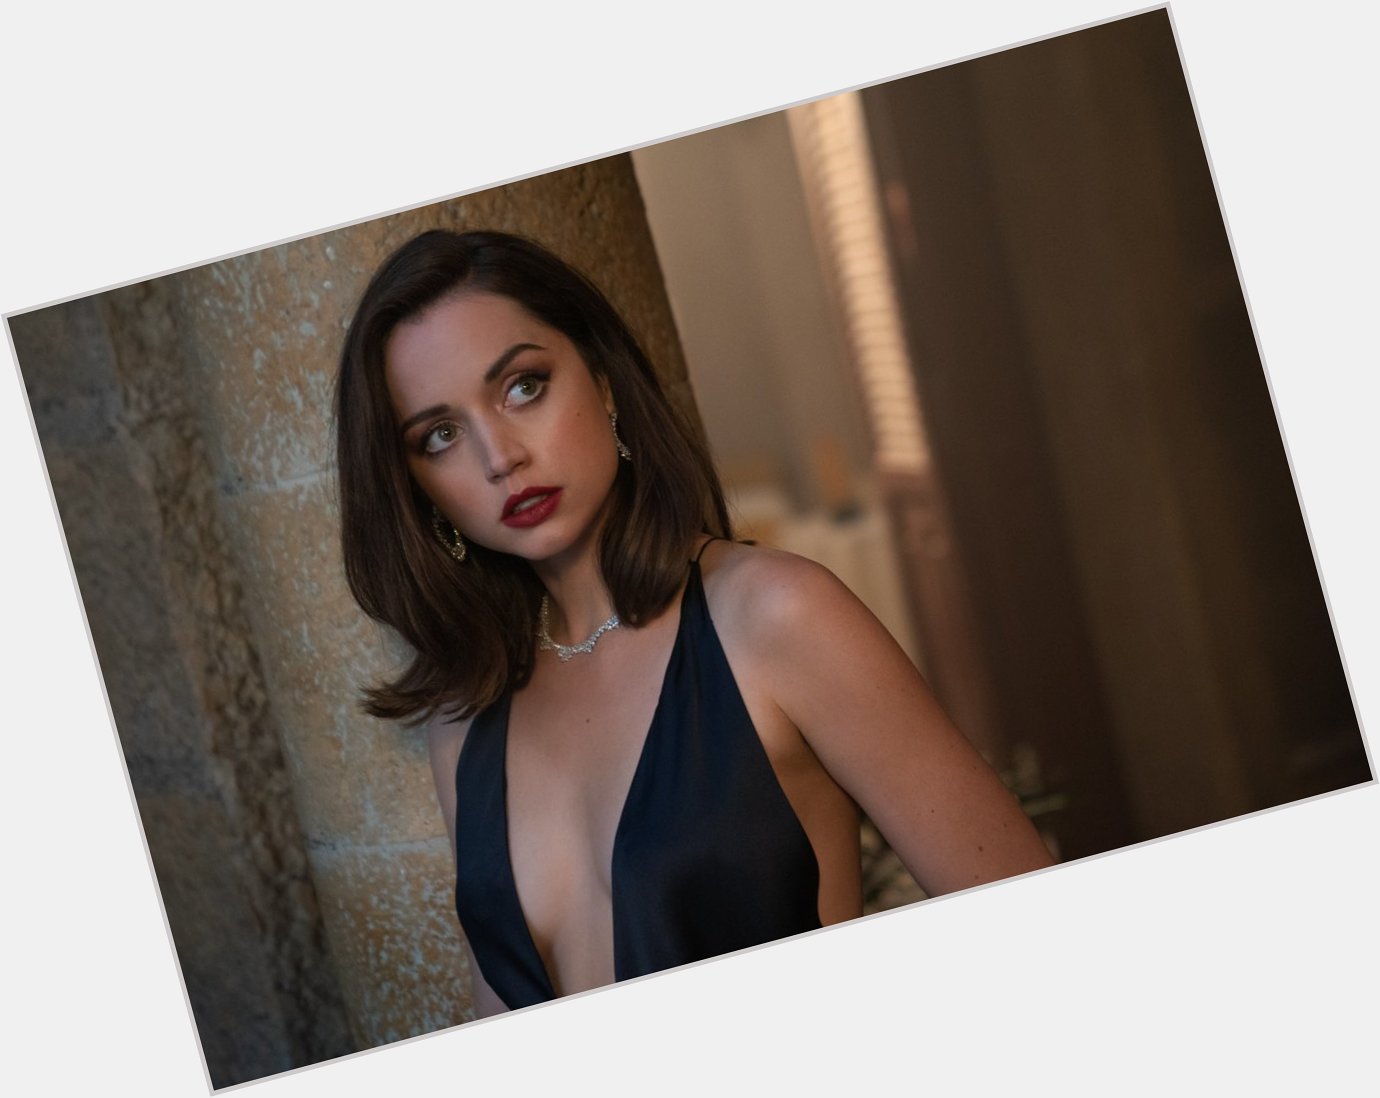 Don t be late in wishing a big Happy Birthday to Ana de Armas who plays Paloma in NO TIME TO DIE. 